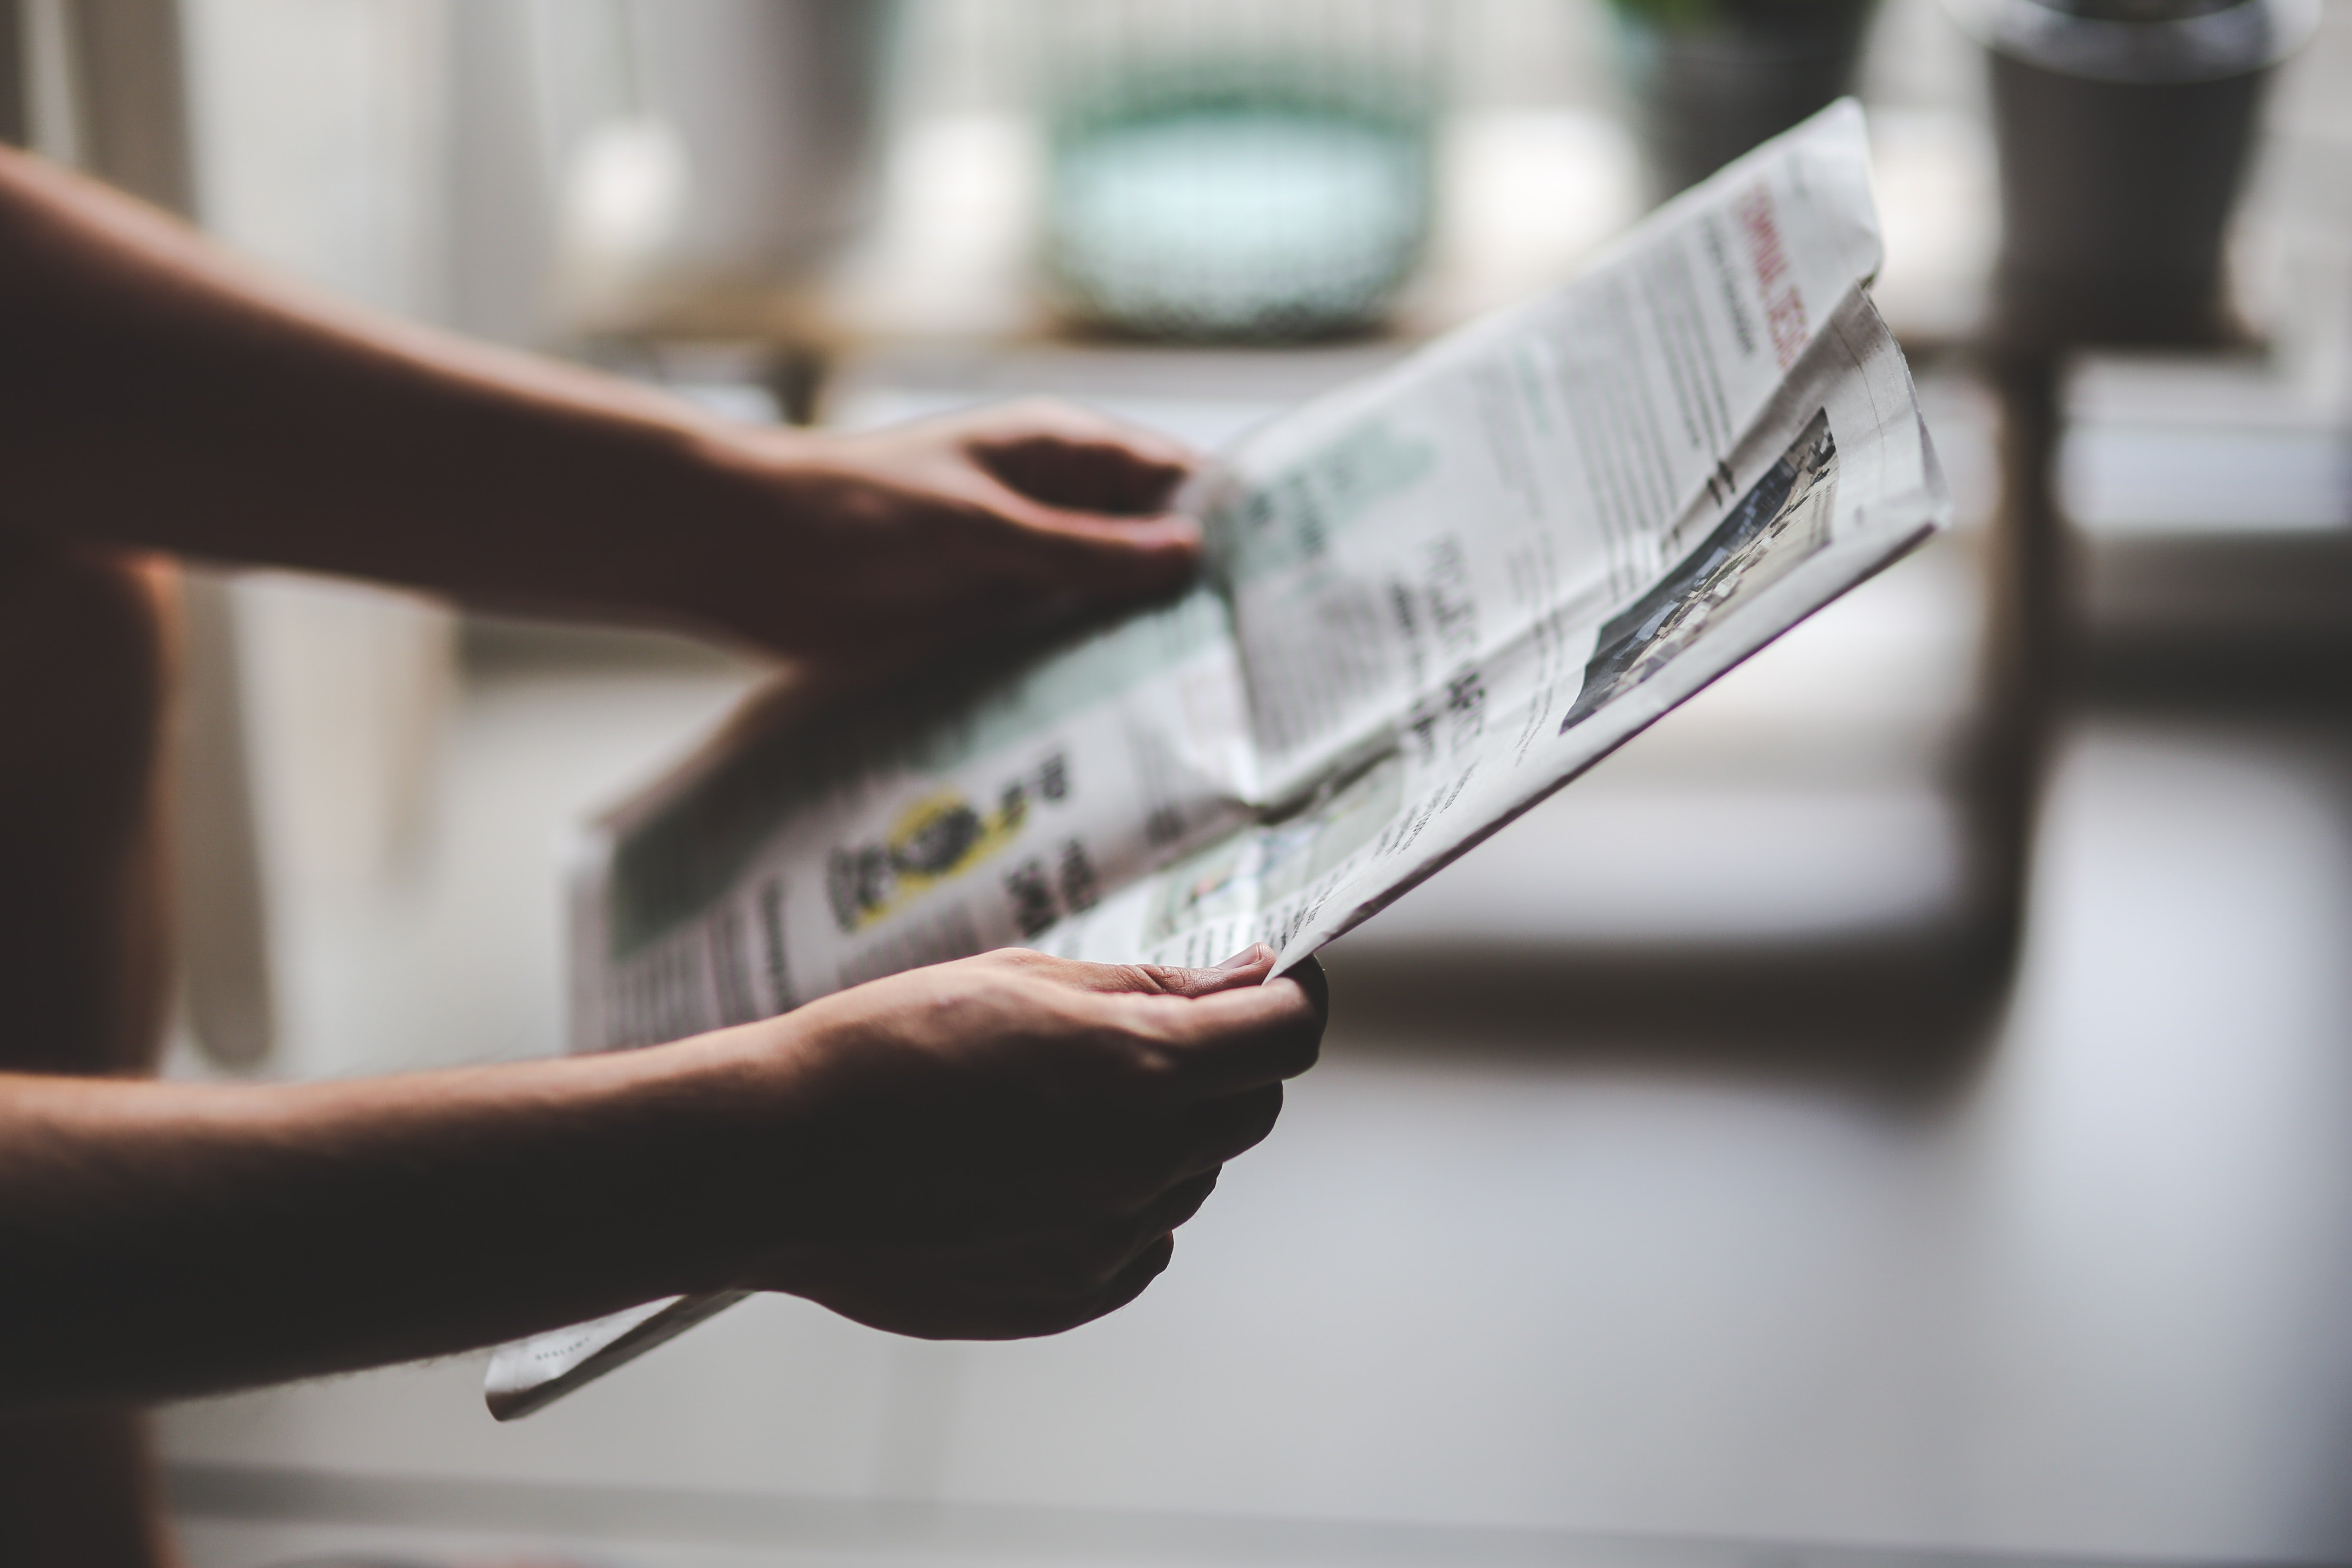 George found Karen's name in the newspaper one day. | Source: Pexels